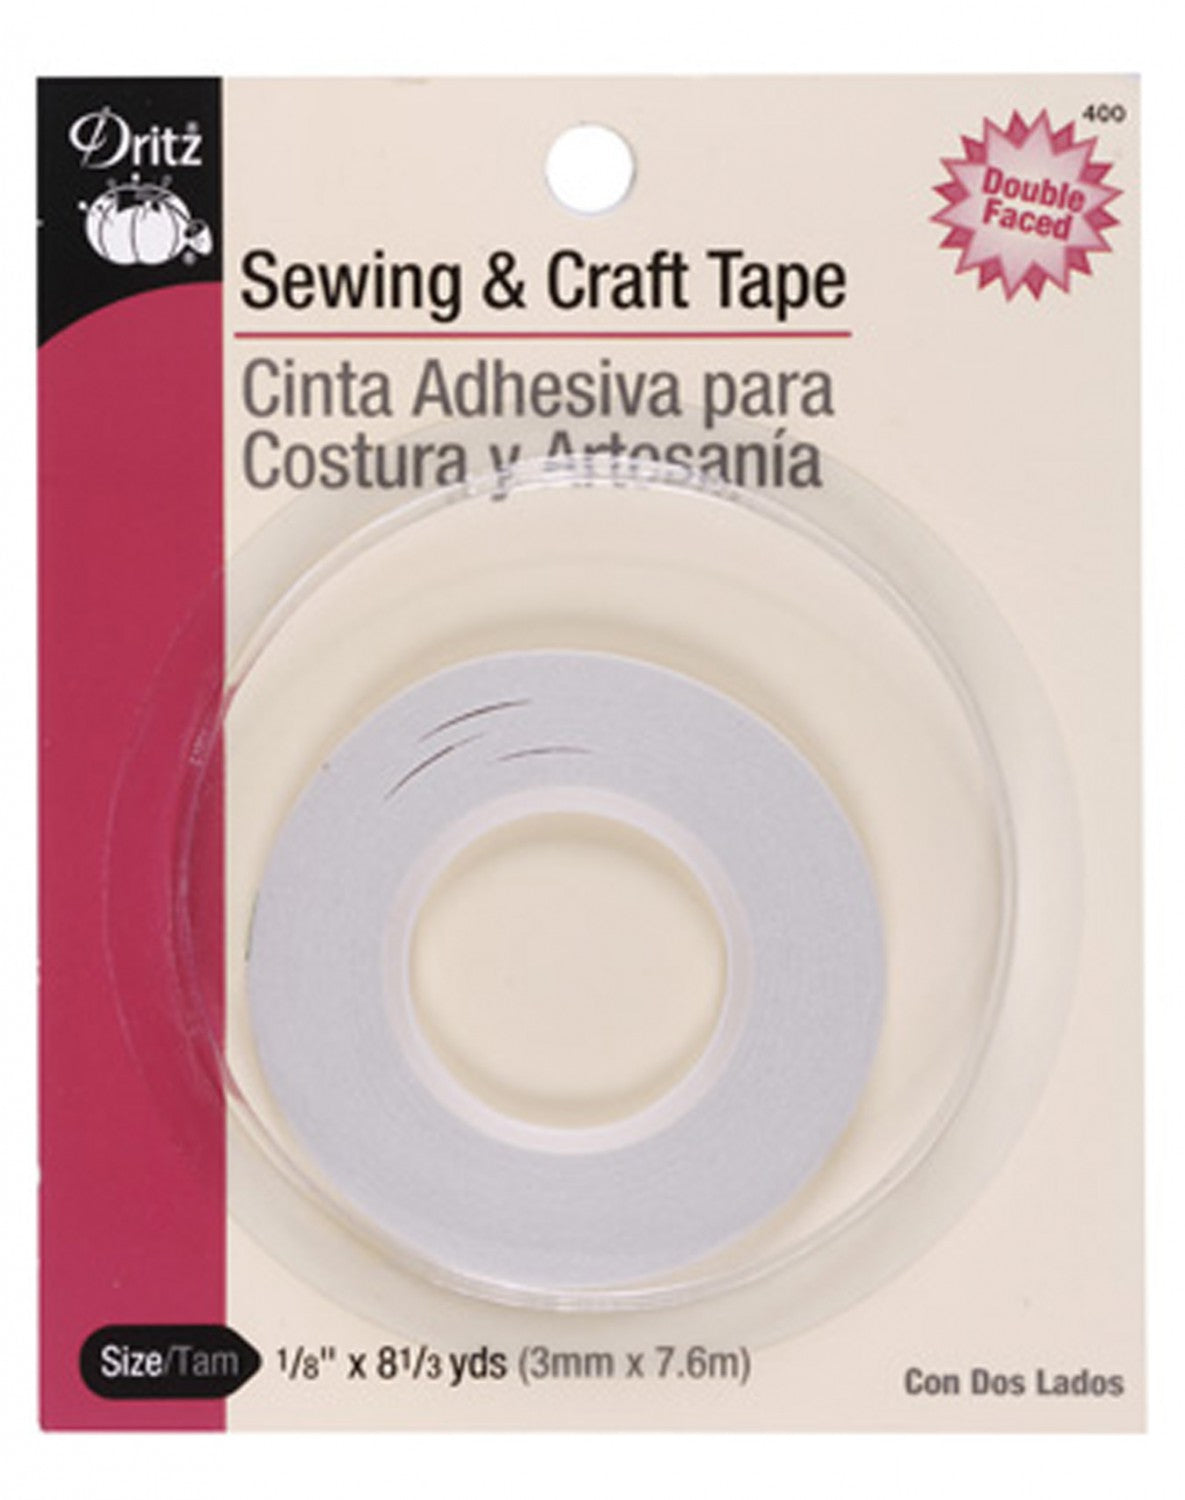 Dritz 1/8" Sewing & Craft Tape